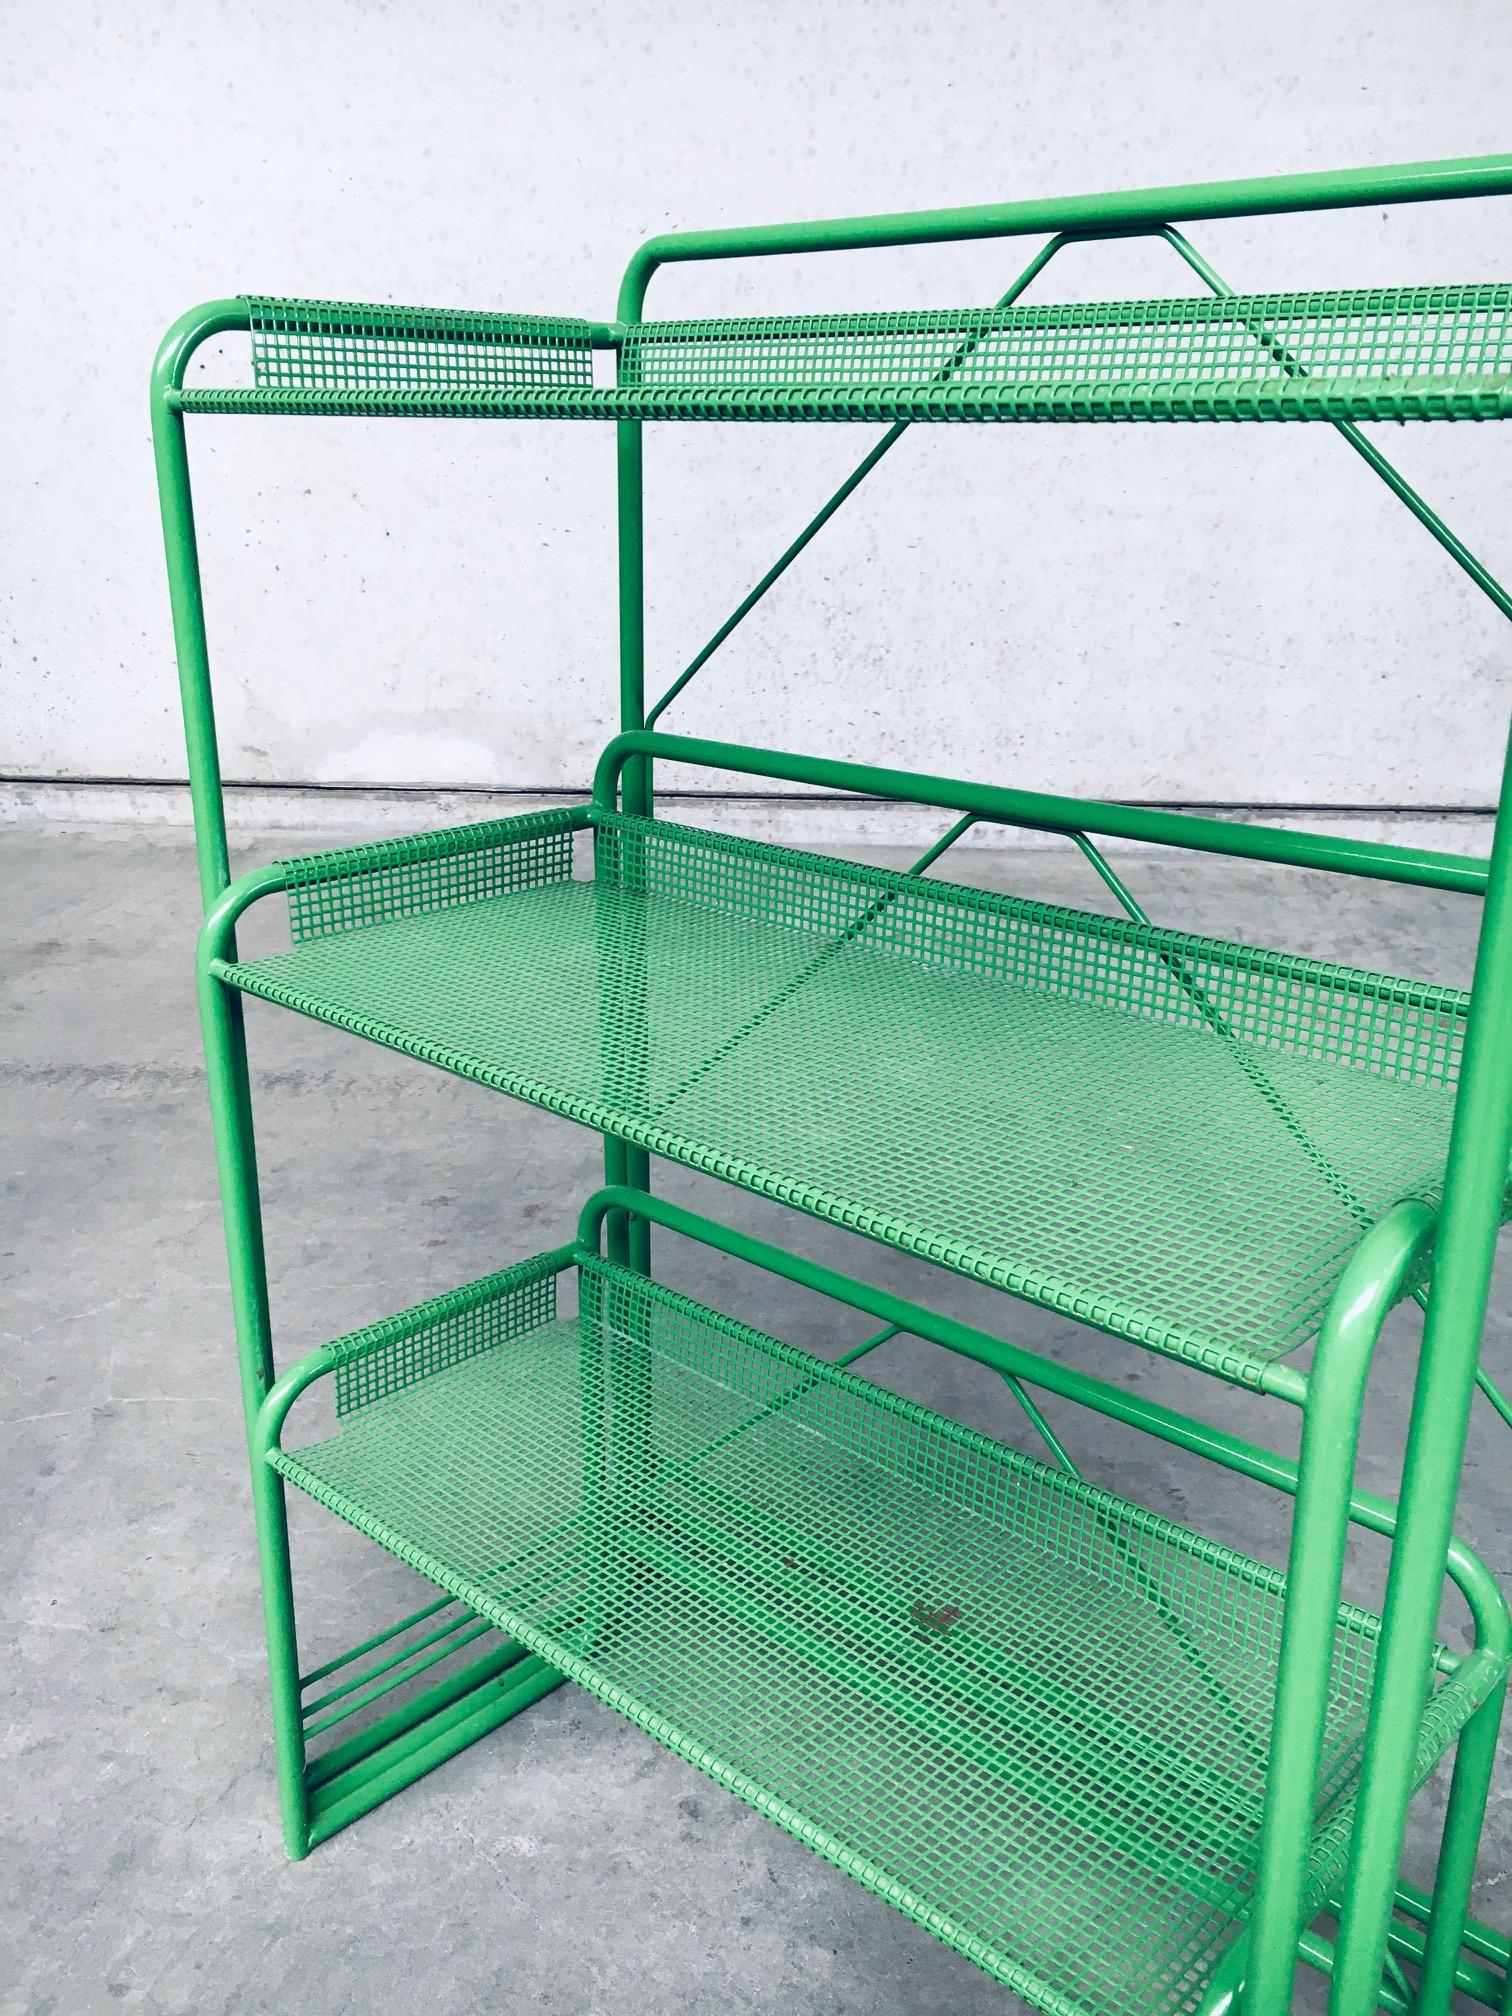 1960's Industrial Design Green Perforated Metal Plant Stand 13